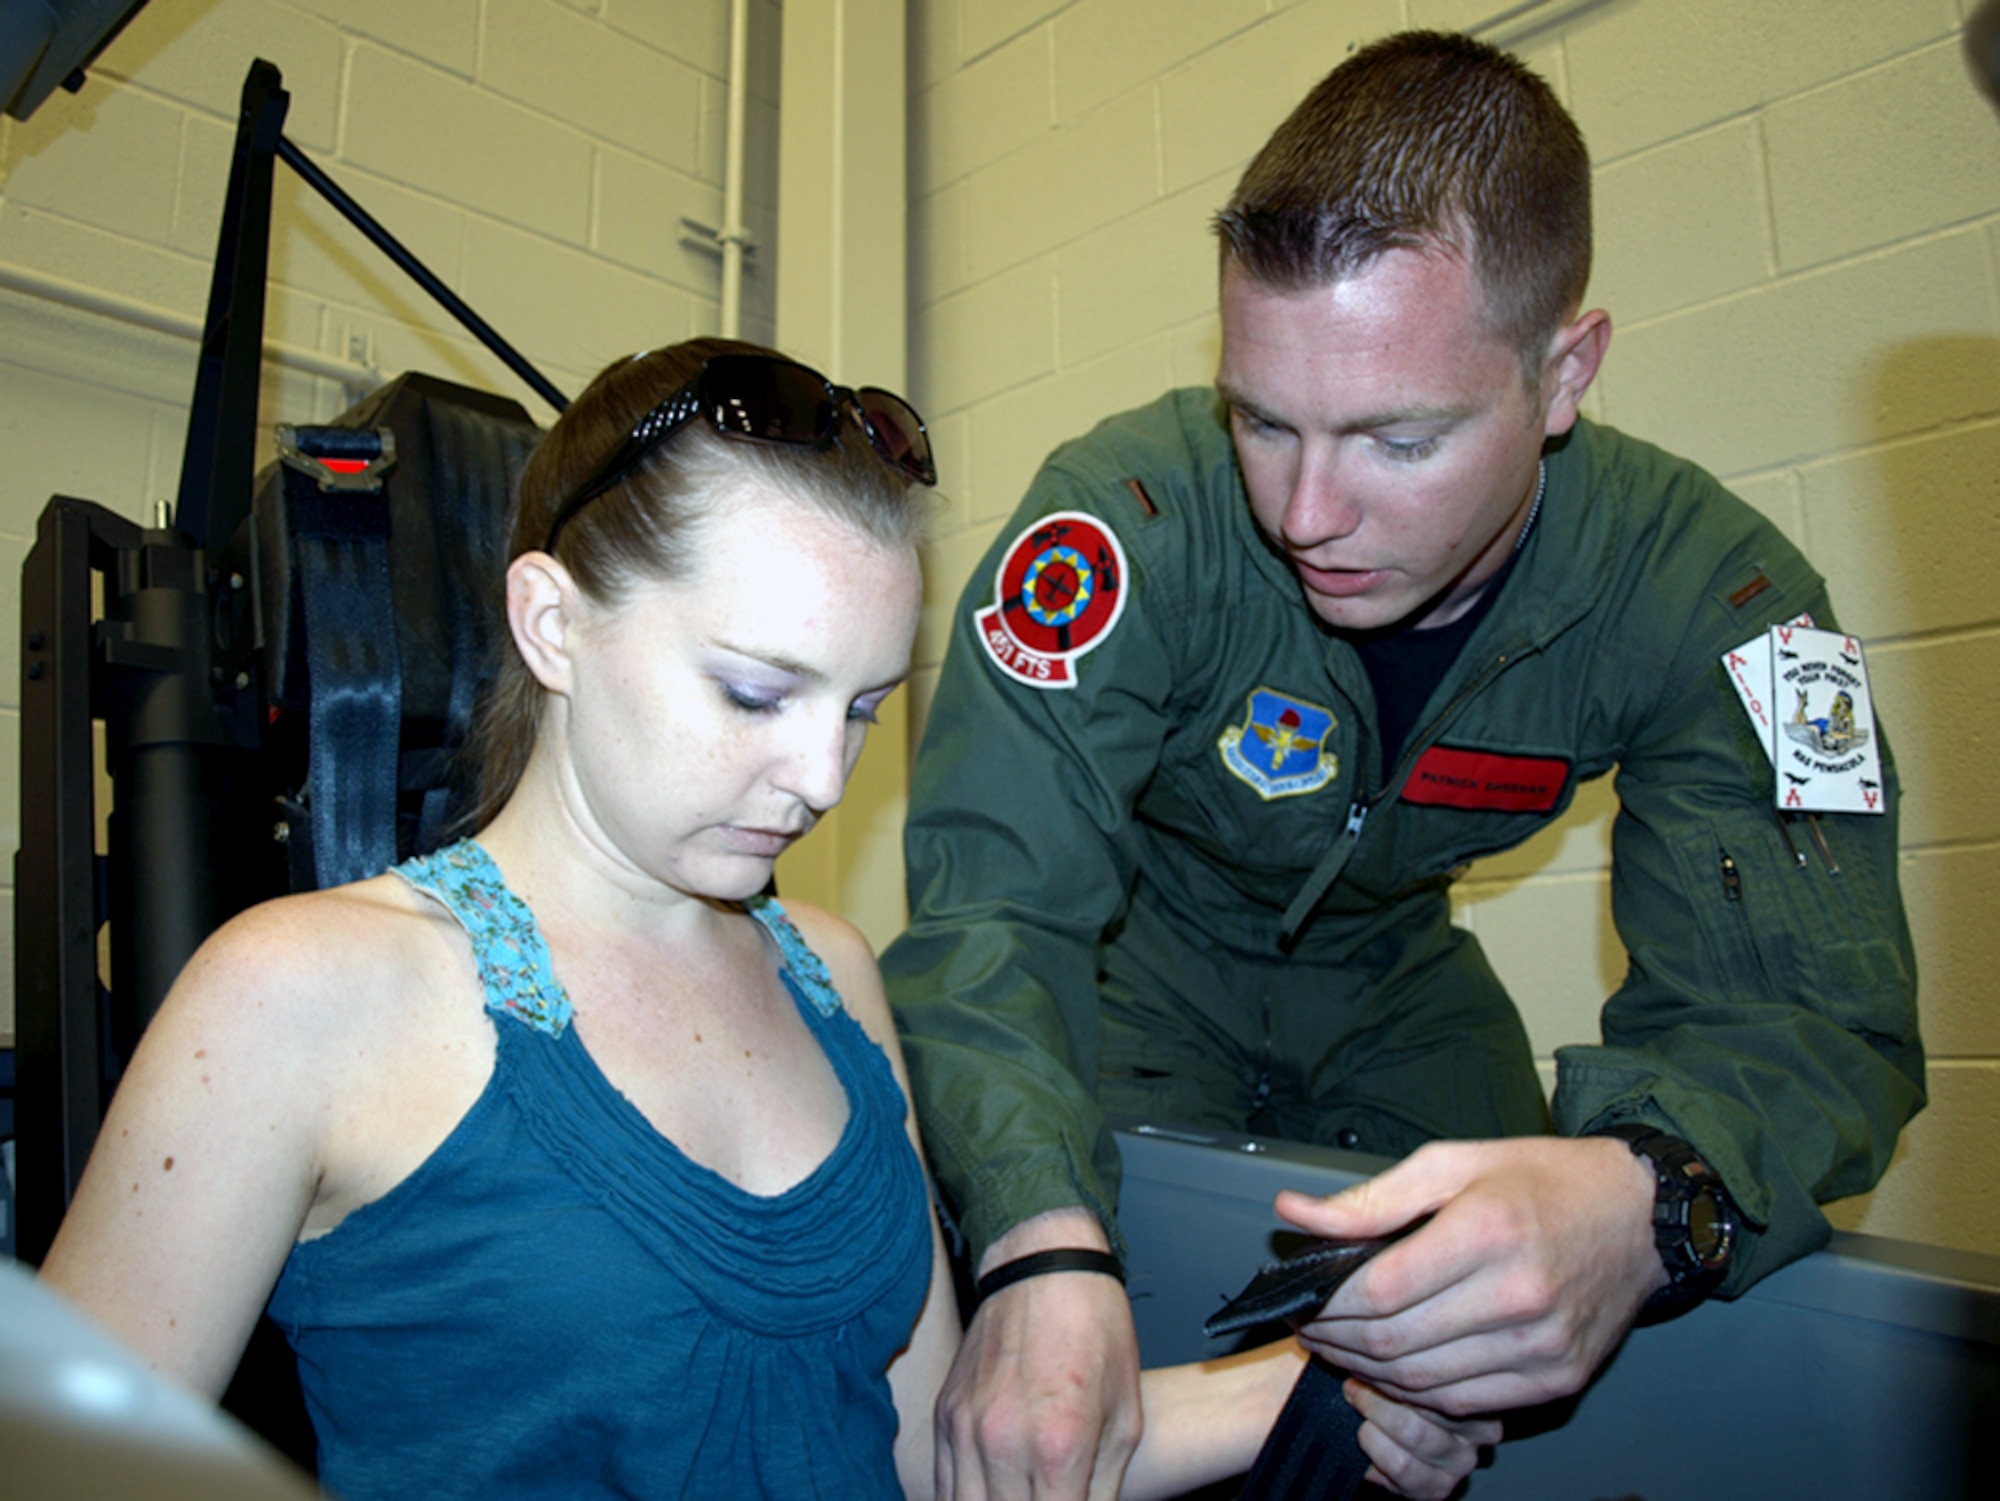 Second Lt. Patrick Sheehan shows a T-6 Texan II cockpit mock-up to his sister, Kate, April 14, 2011, at Naval Air Station Pensacola, Fla. The mock-up is used by combat systems officer trainees to practice getting into and out of the T-6, as well as canopy operation procedures. Lieutenant Sheehan is a CSO trainee participating in the CSO training program sponsored by members of the 479th Flying Training Group there. (U.S. Air Force photo)